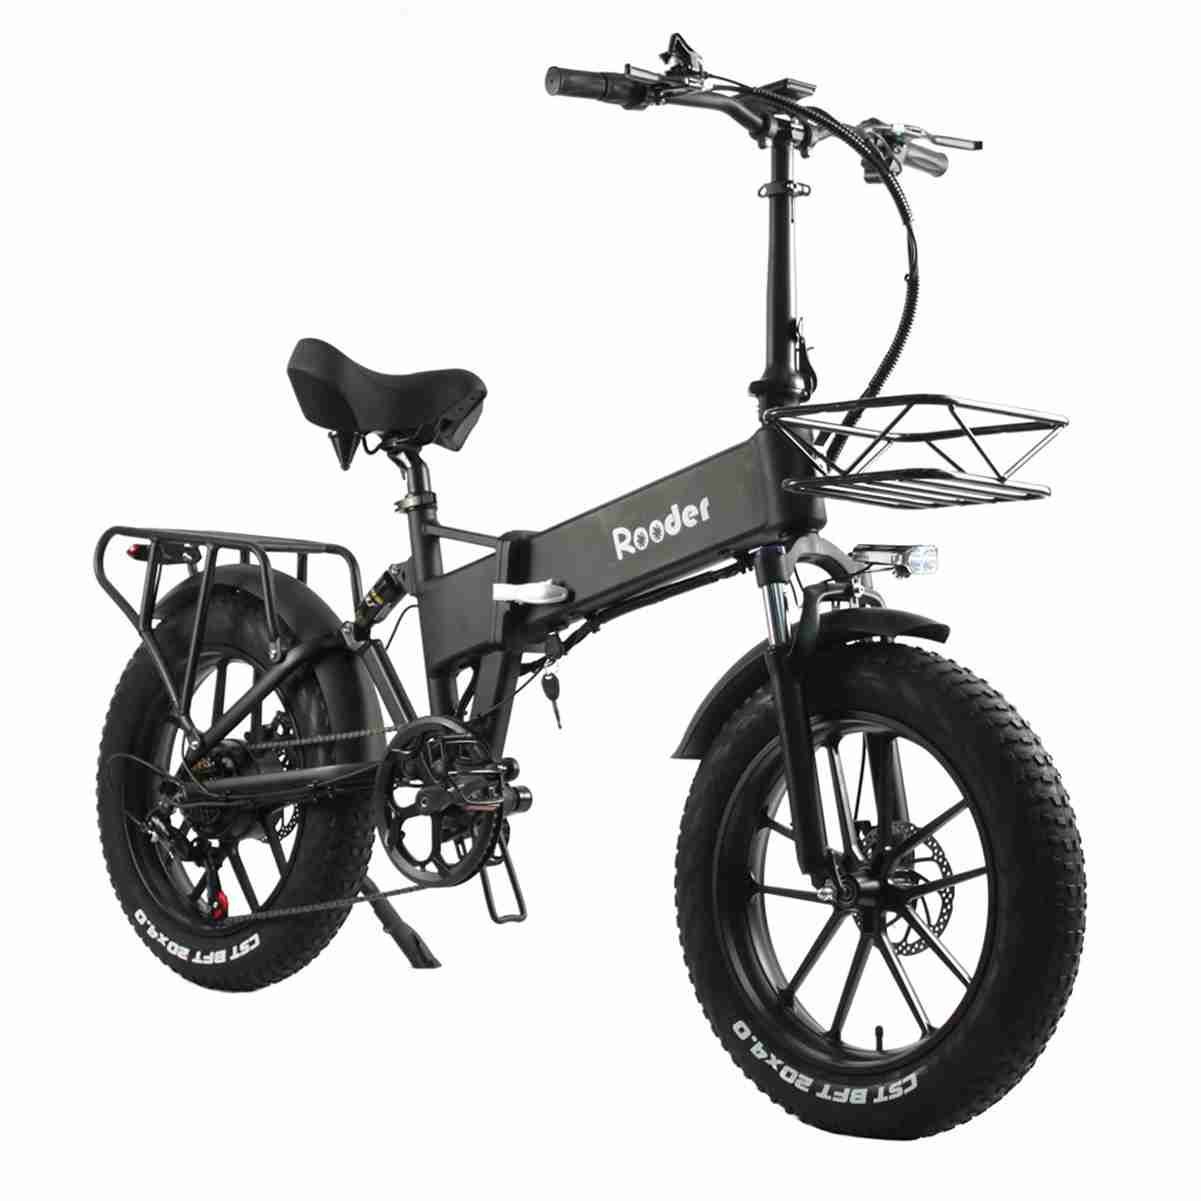 Best Electric Bike For Sand